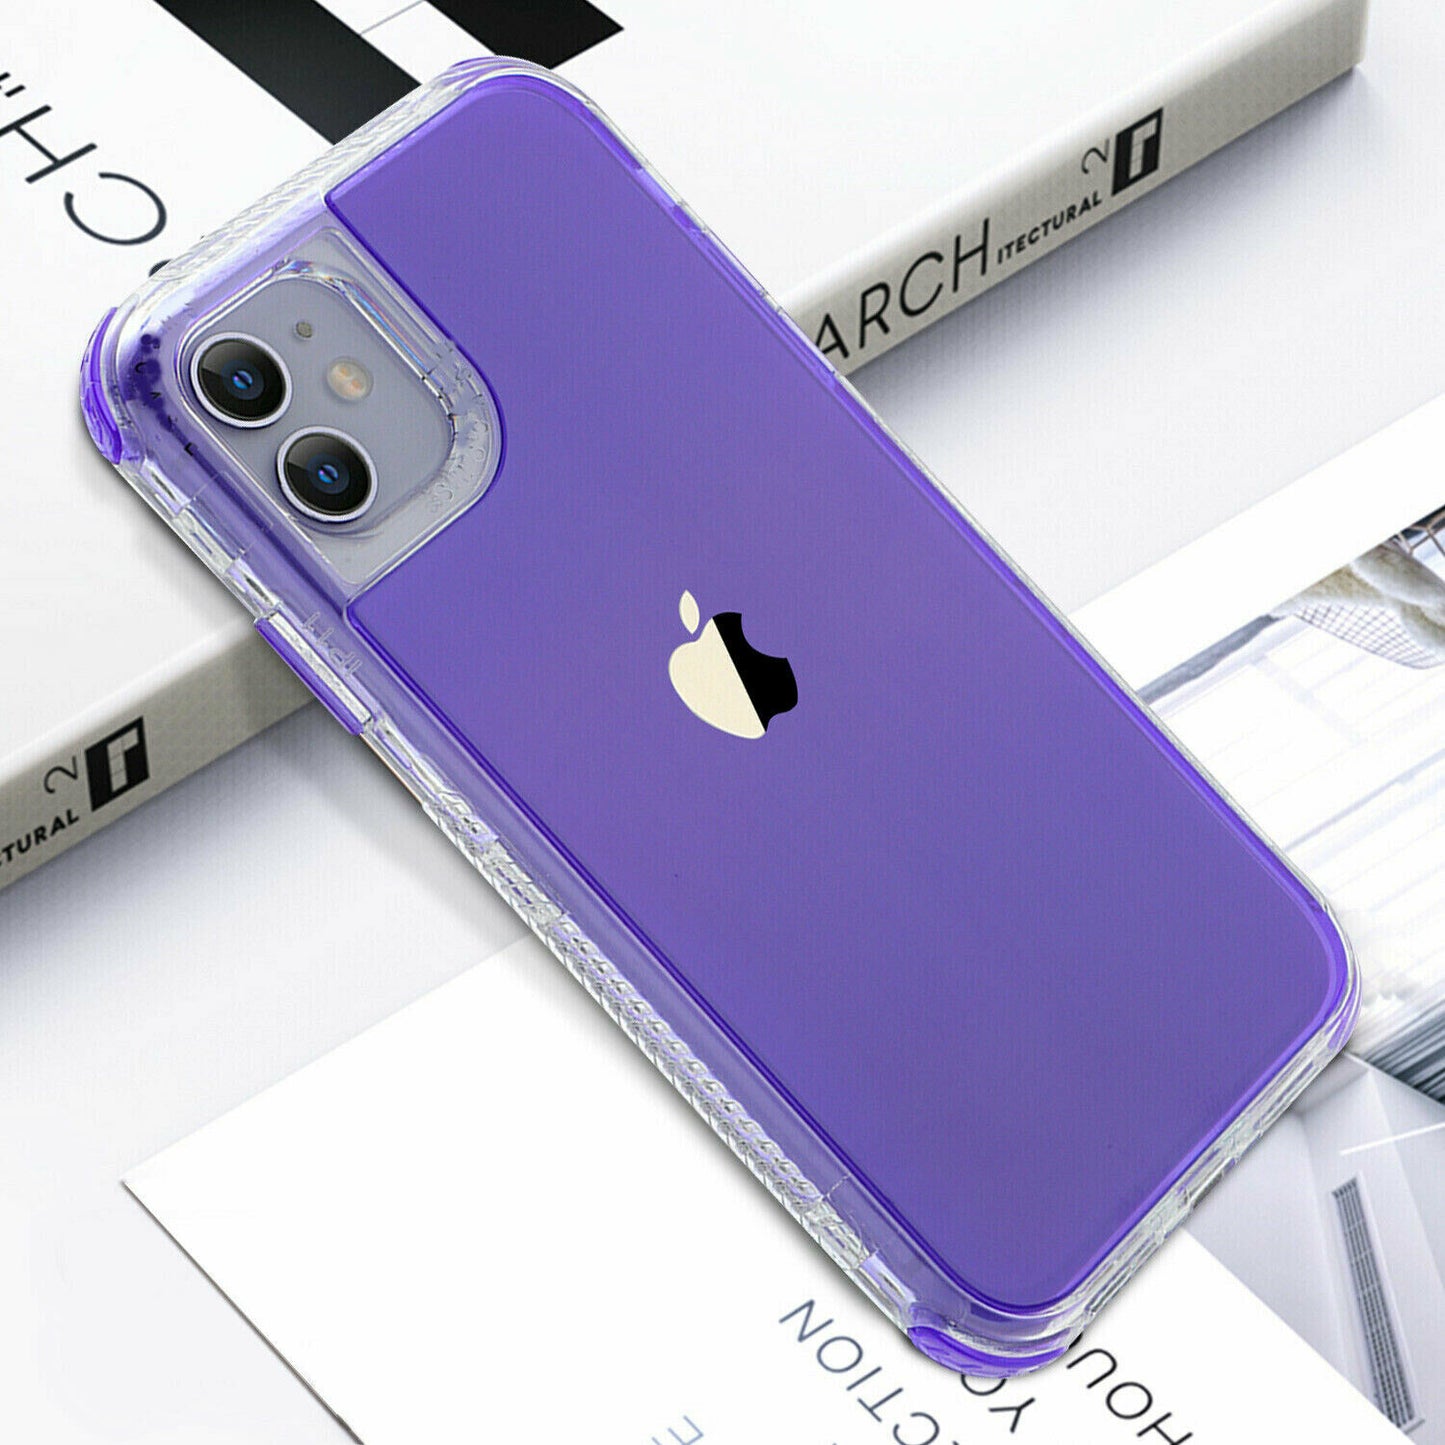 Shockproof Hybrid Bumper Cover for iPhone 12 Pro Max/11 Pro Max - carolay.co